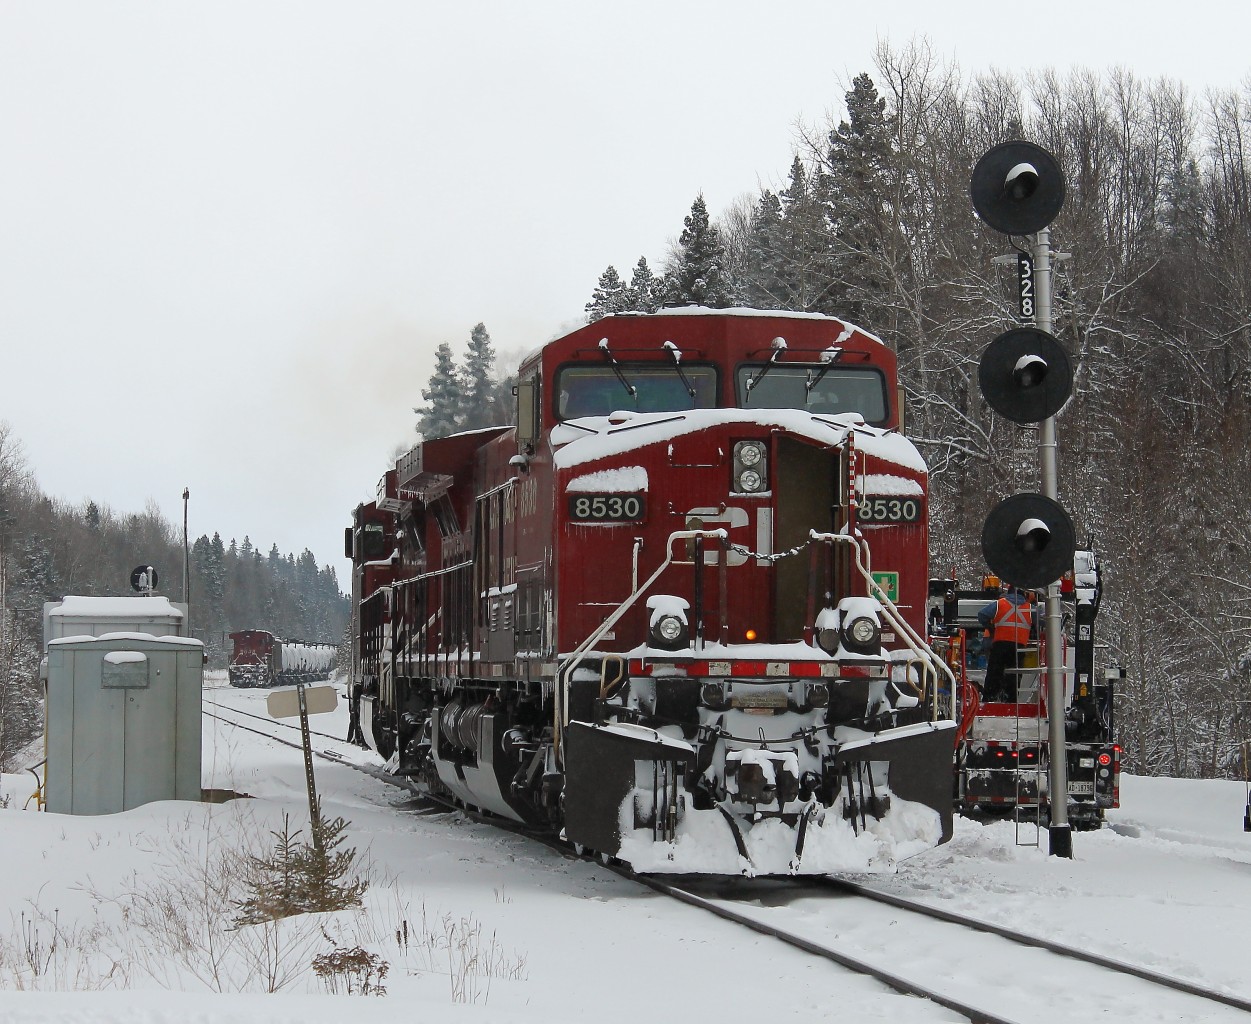 The originating crew on train 608 [crude oil loads] have parked their train in the siding at Gravel during the night.  As the only road access here is near the west switch, the head end power  – cp9702 / cp8530 – was brought  to the west end and positioned in the siding near the tail end remote. The new crew has arrived and is backing the head end power out of the siding onto the main line. They will then proceed eastward  to the east switch, back onto the train and continue on to the next crew change point at Schreiber.